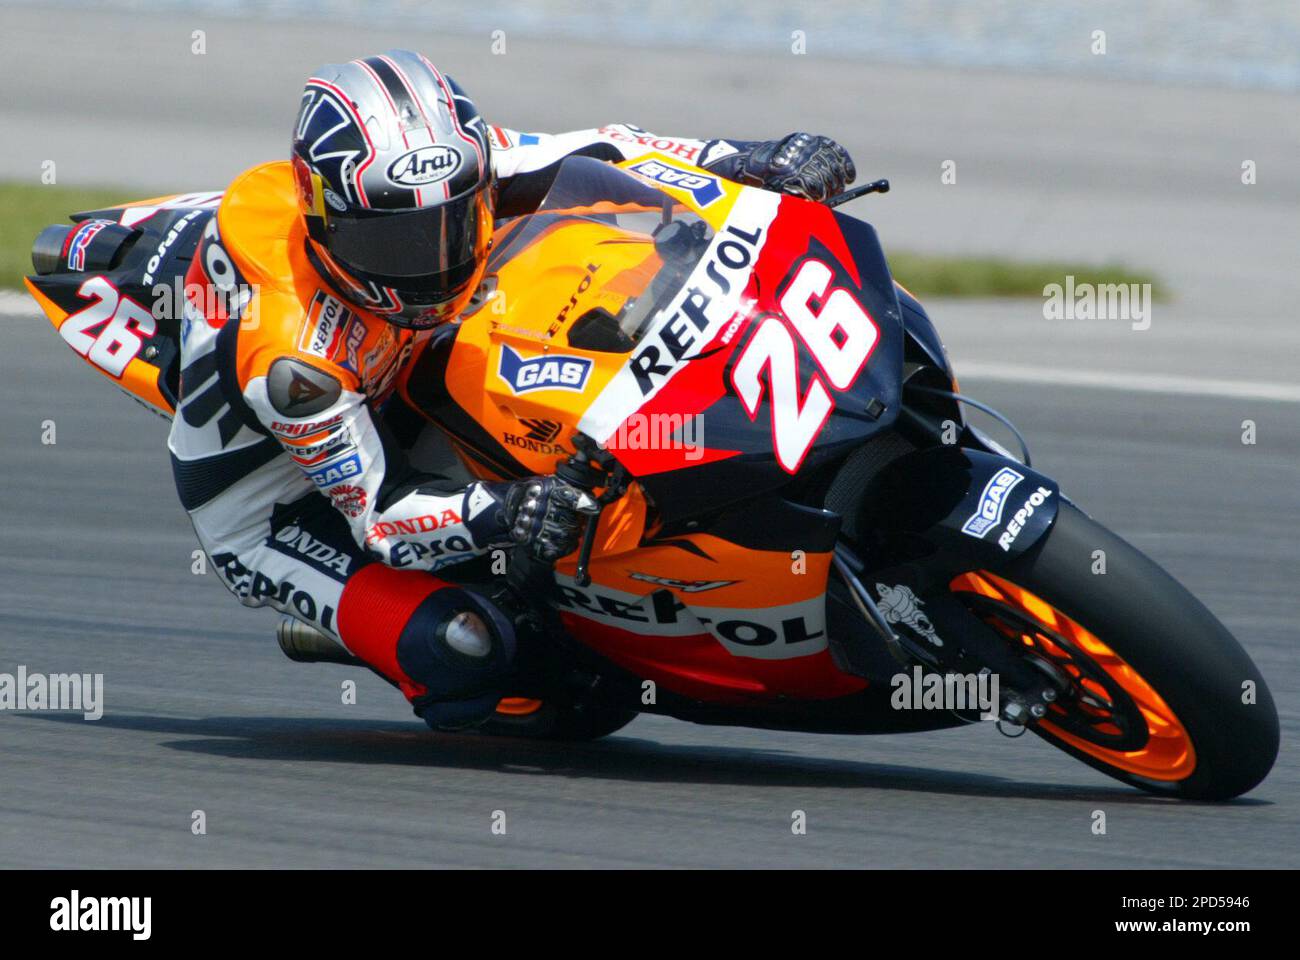 Repsol Honda Team Moto GP rider Dani Pedrosa of Spain takes a curve during  a practice session for the Turkish Grand Prix at the Istanbul Park race  track during the first free